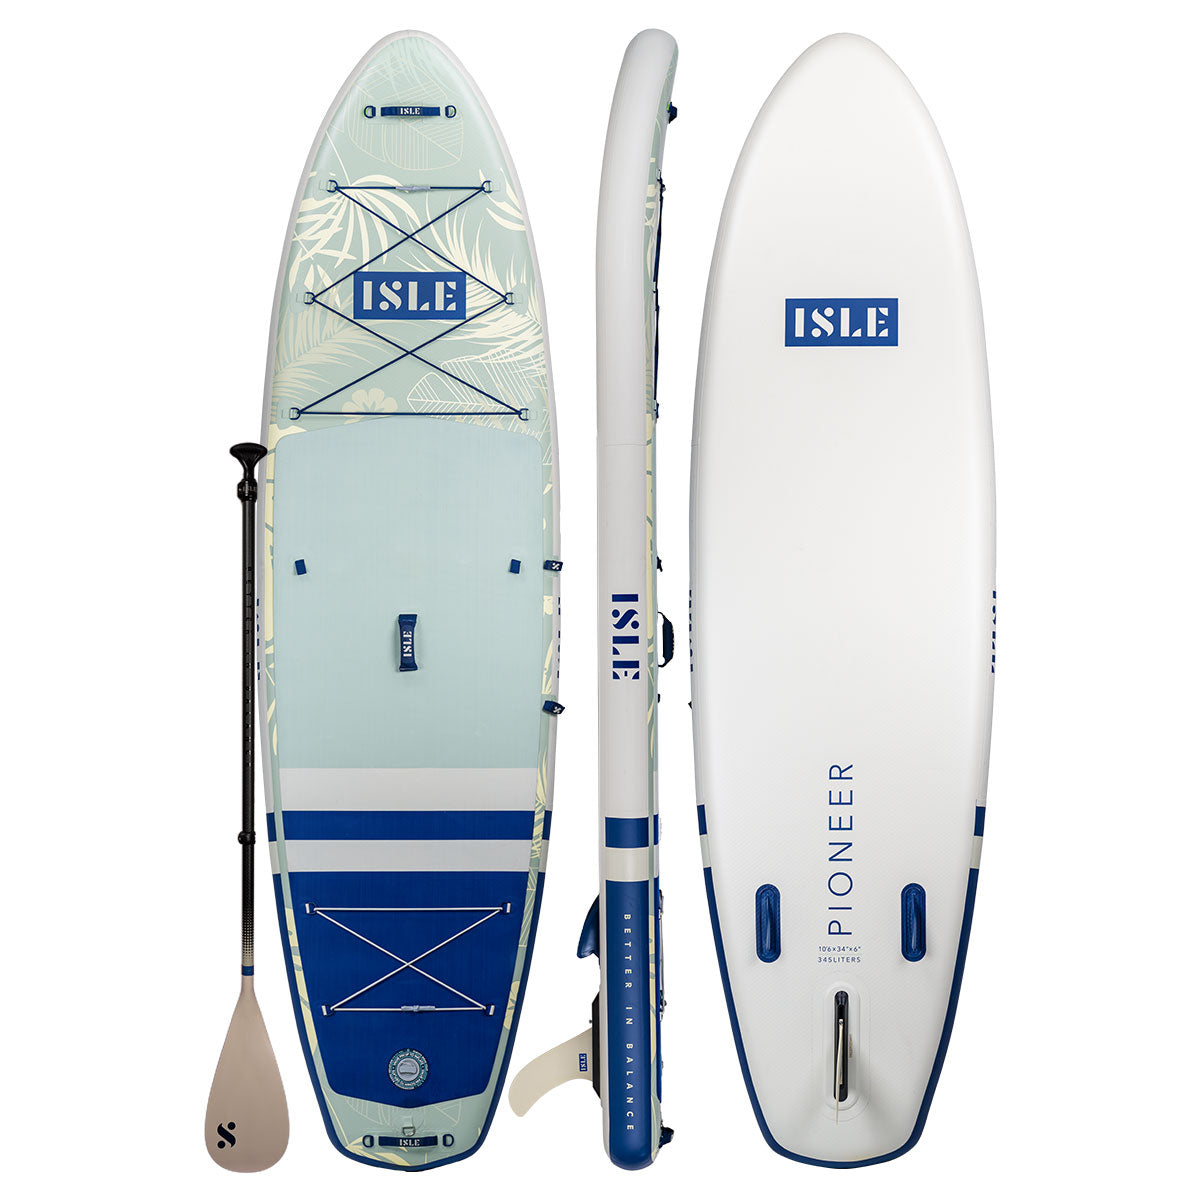 Pioneer 2.0 Inflatable Paddle Board in Palm/Seafoam